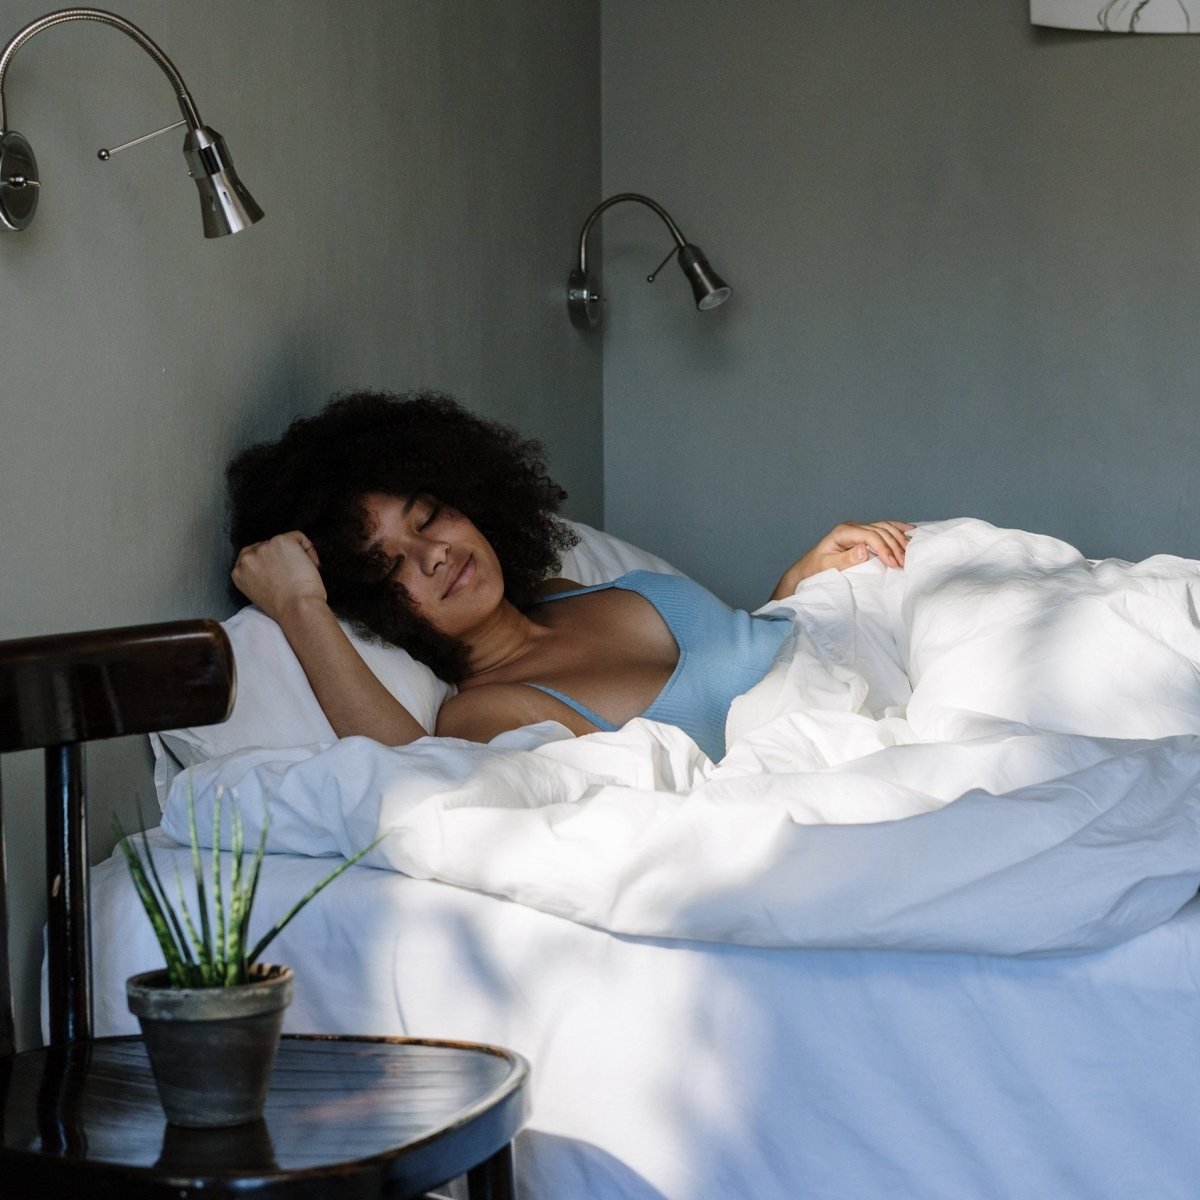 A woman waking up happy in her bed